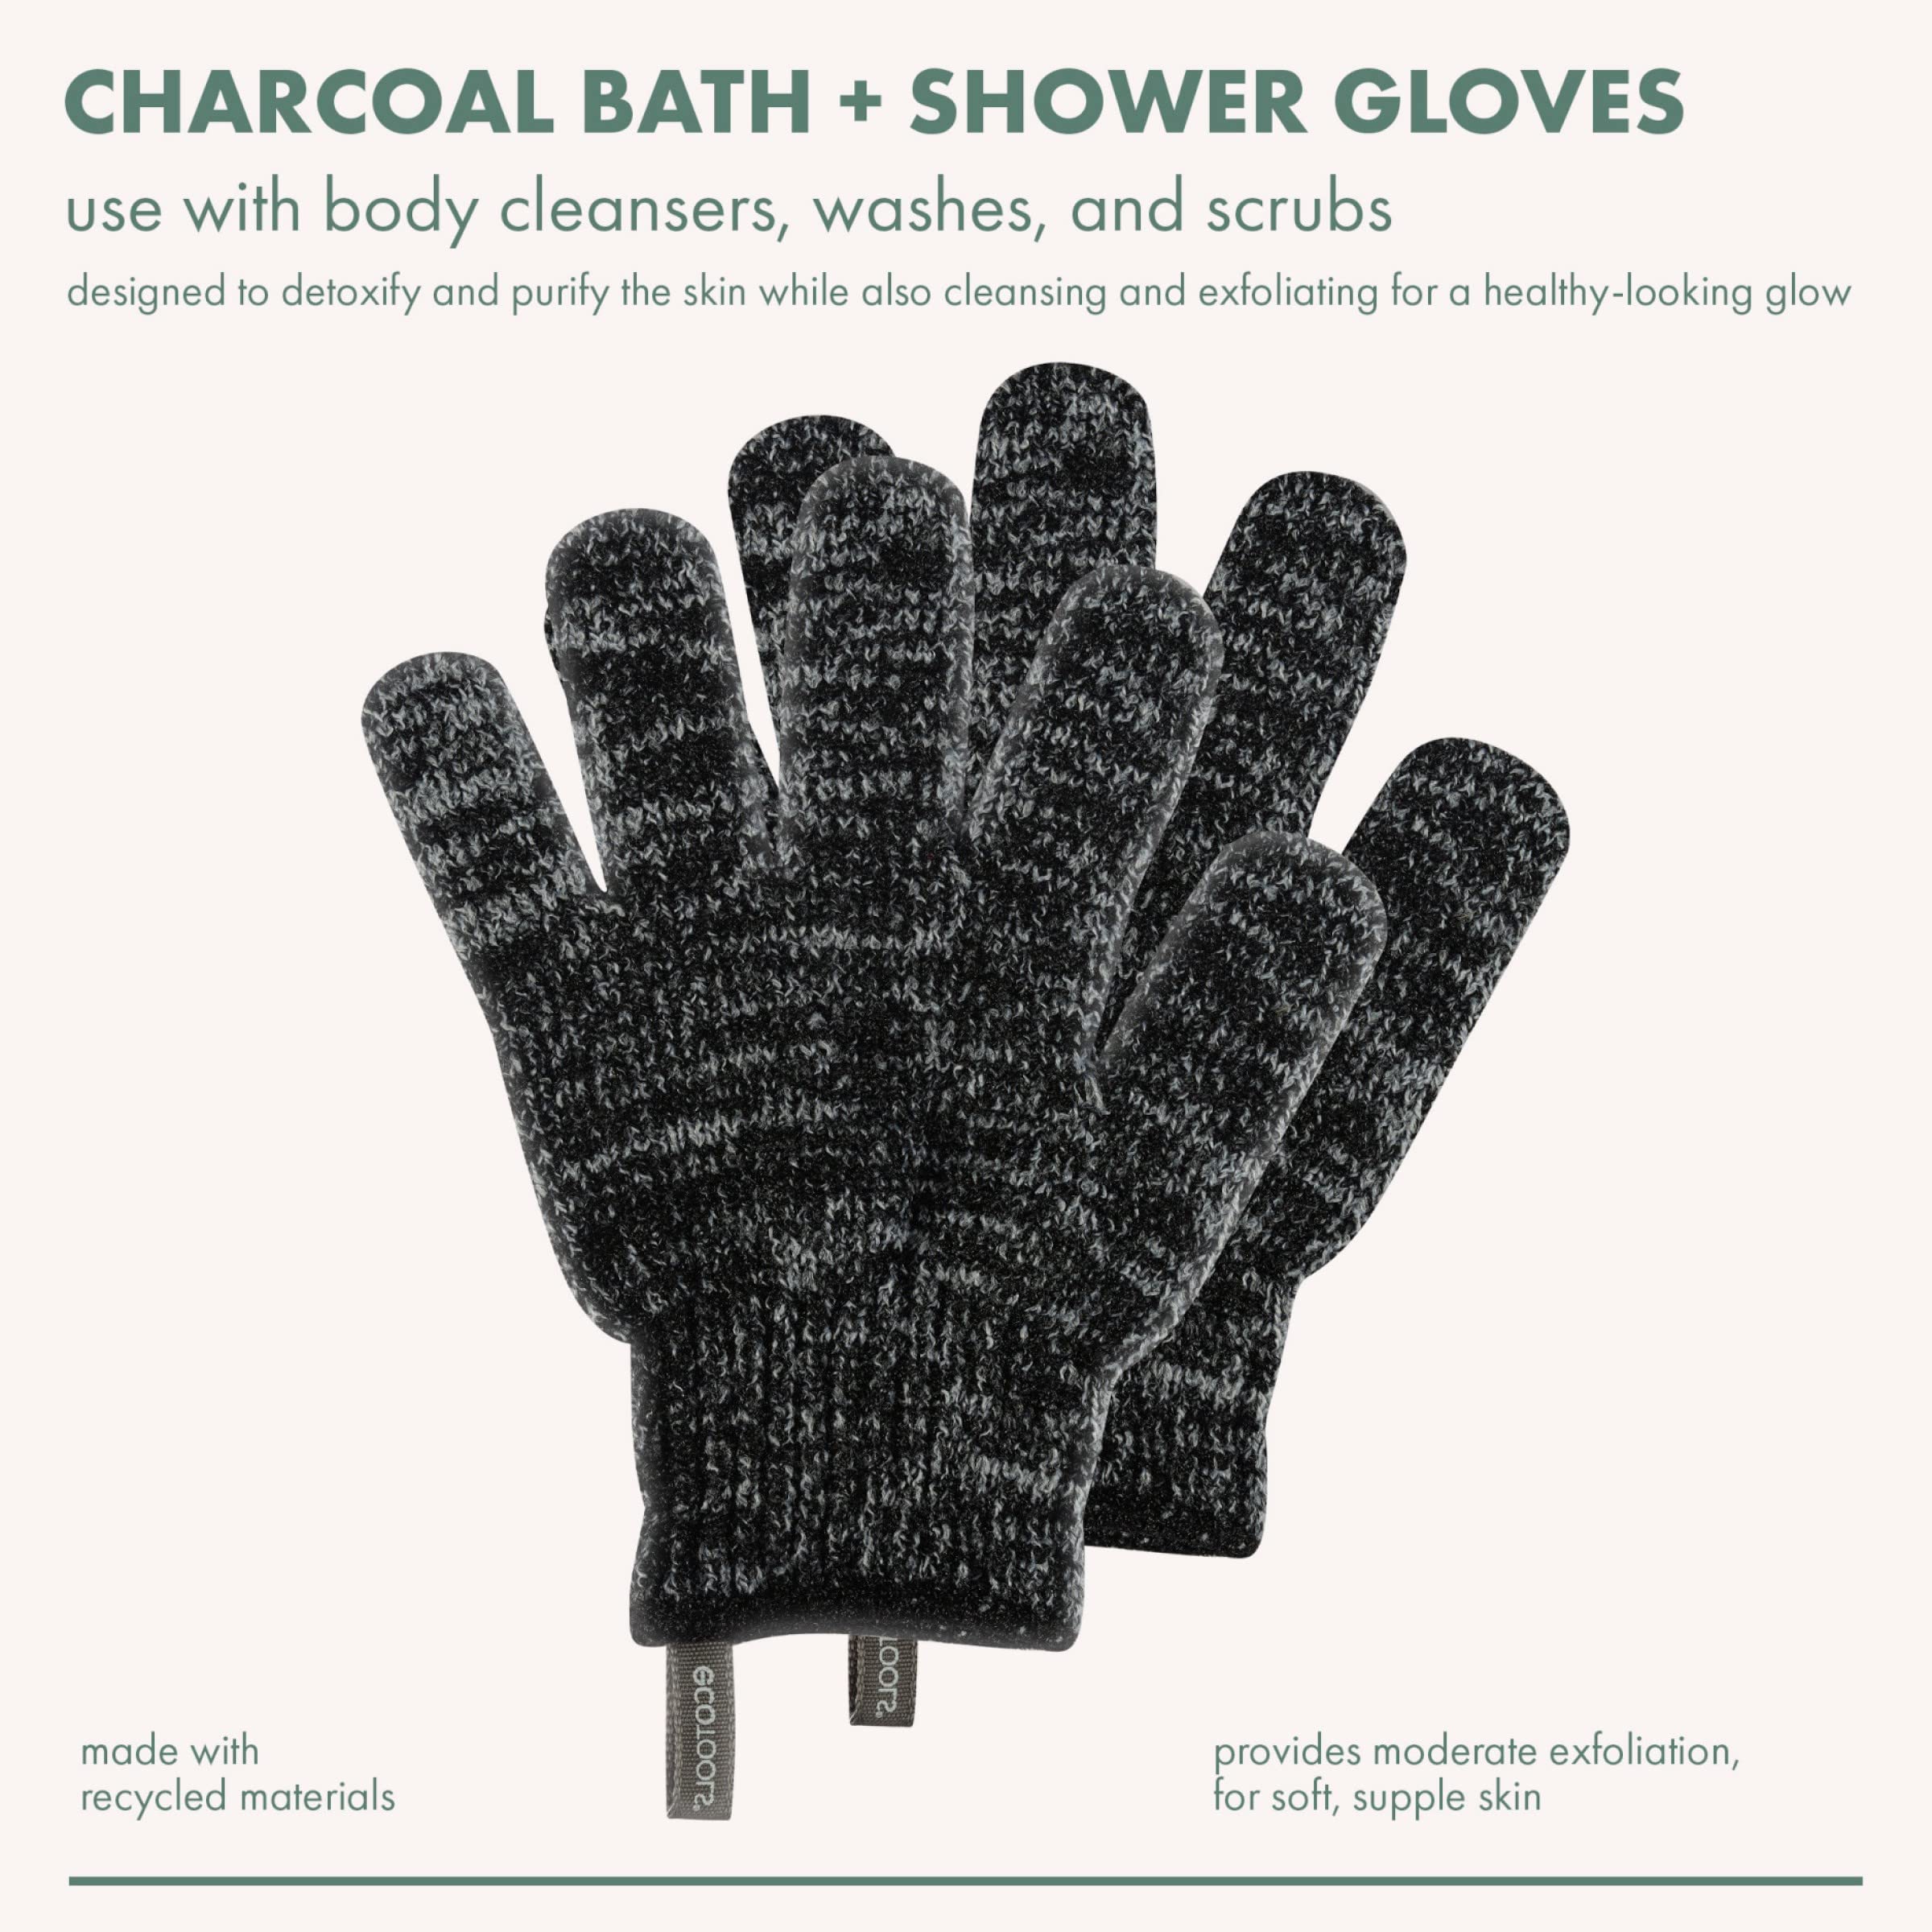 EcoTools Charcoal Infused Bath & Shower Gloves, Cleansing For Whole Body, Self-Tan Prep & Removal, Exfoliating, Detoxifying & Purifying, Recycled Netting, Eco-Friendly, Vegan, 1 Pair, 2 Gloves Total